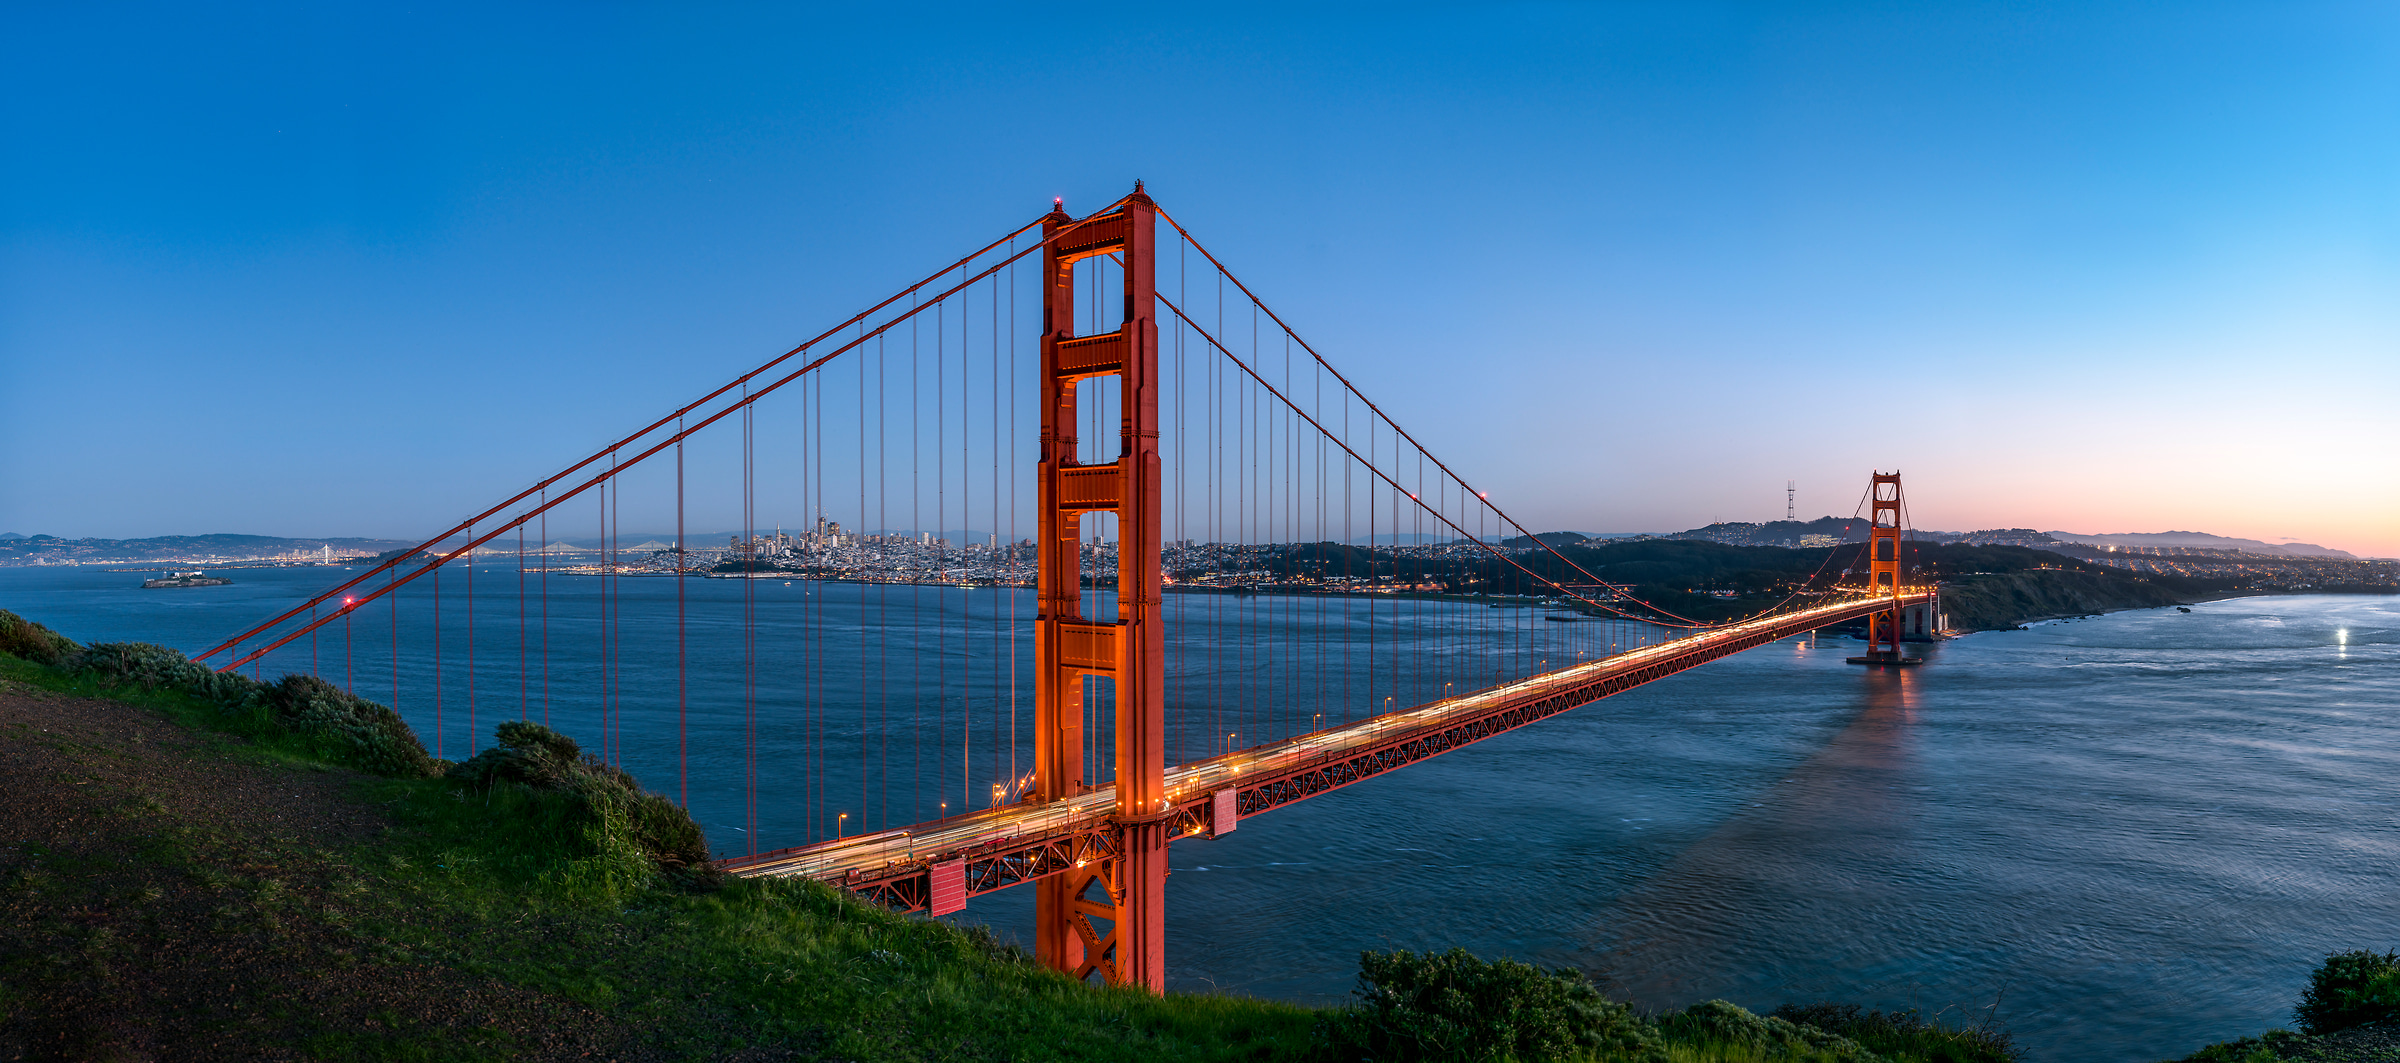 334 megapixels! A very high resolution, large-format VAST photo print of the Golden Gate Bridge, San Francisco, and the San Francisco Bay; cityscape fine art photo created by Justin Katz from Battery Spencer in Sausalito, California.